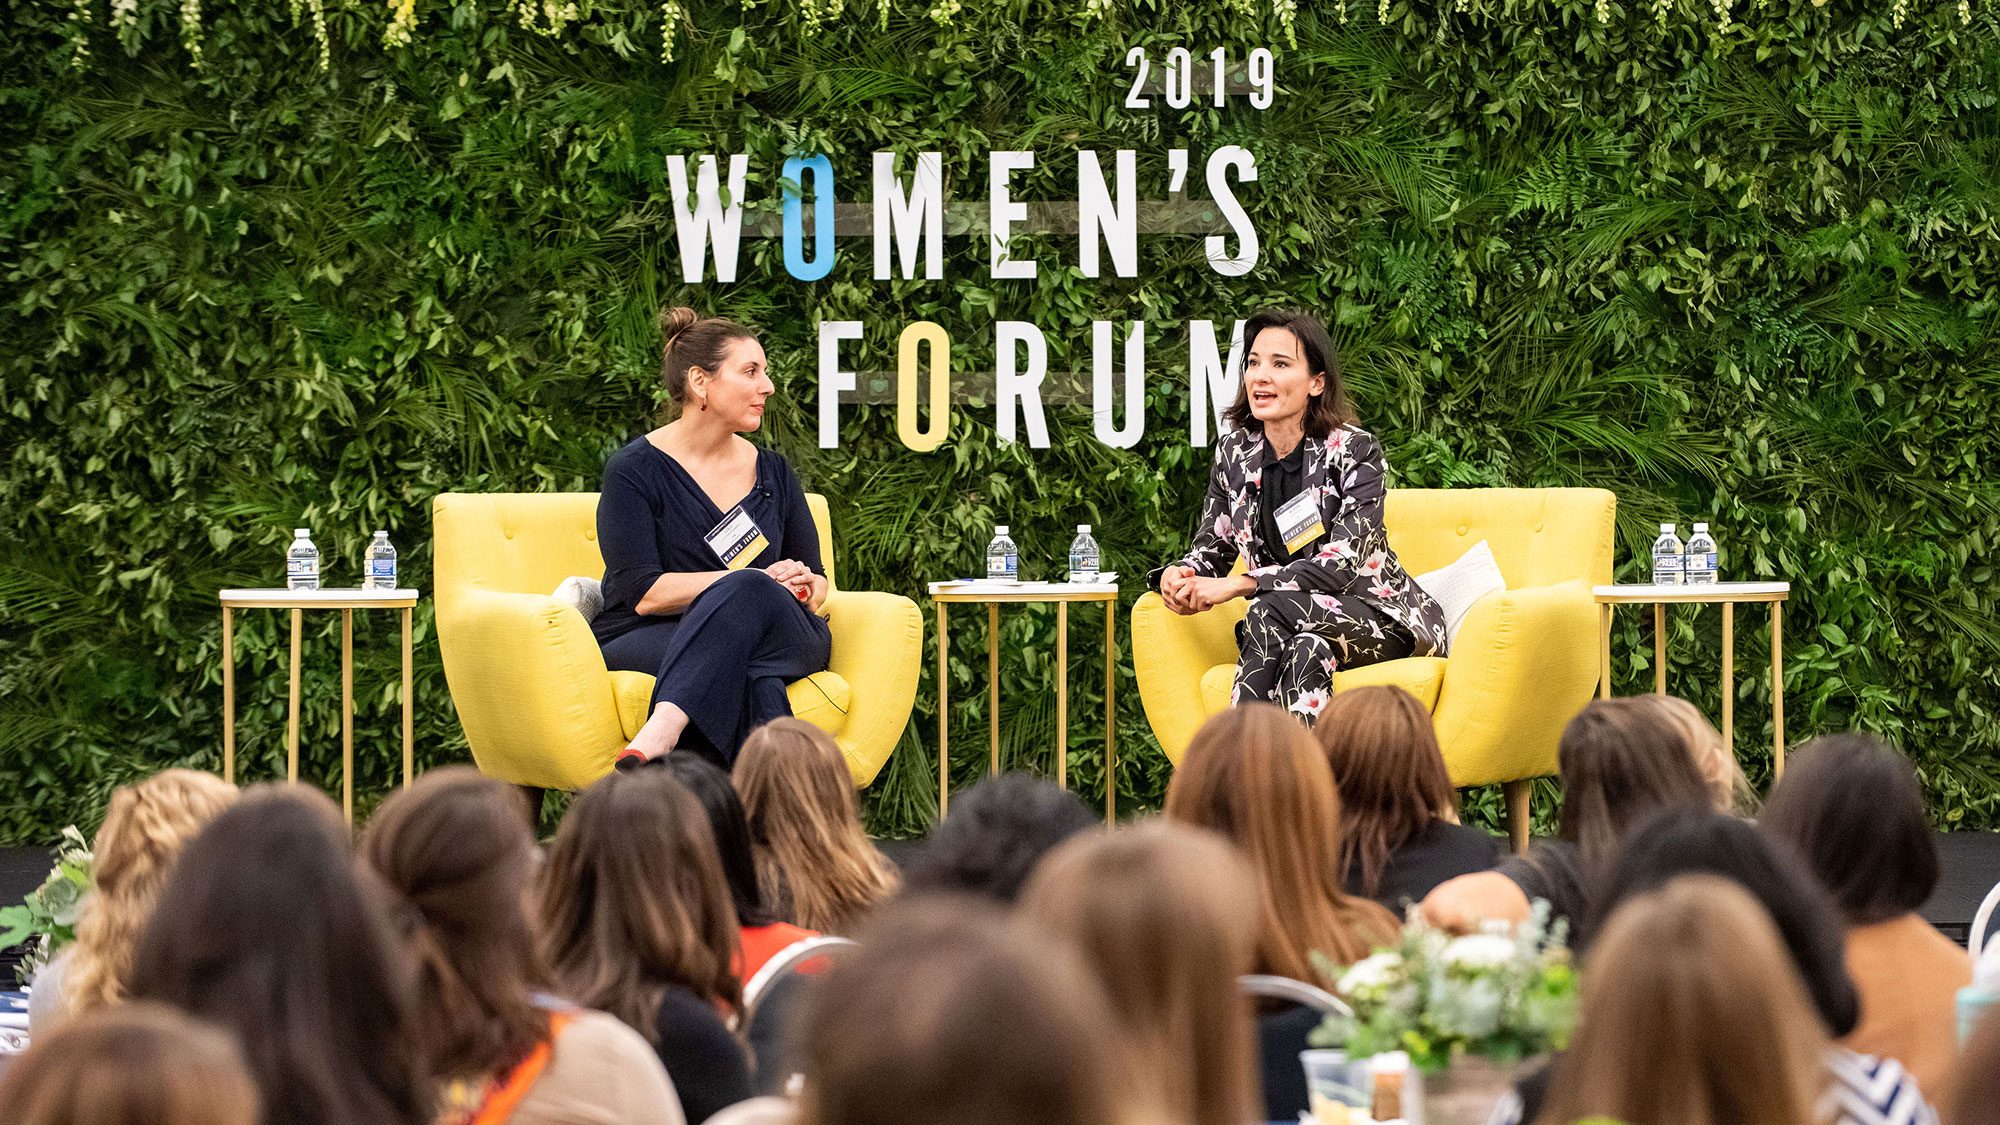 Lulu Garcia-Navarro and Alison Becker sit down on stage and talk with 2019 Women's Forum signage in the background.